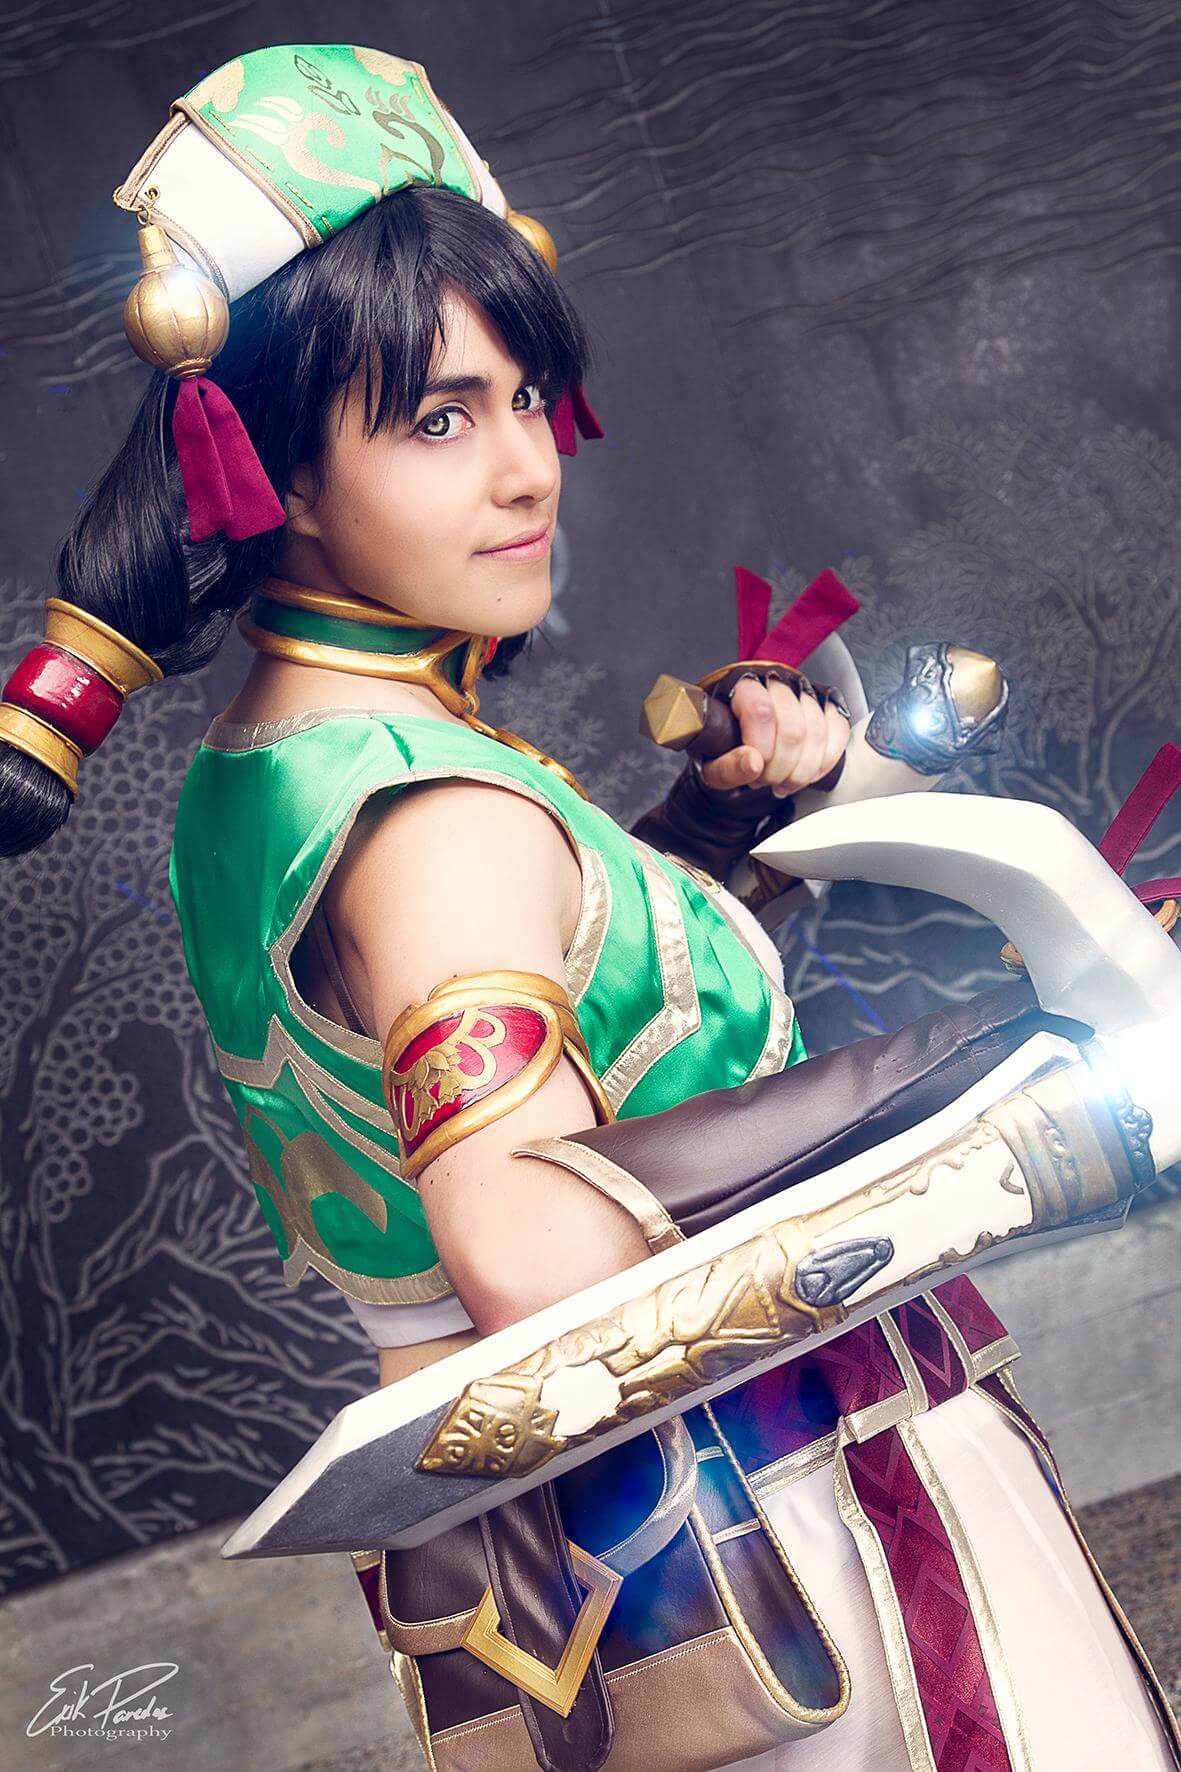 49 Hot Pictures Of Talim Which Are Going To Make You Want Her Badly | Best Of Comic Books